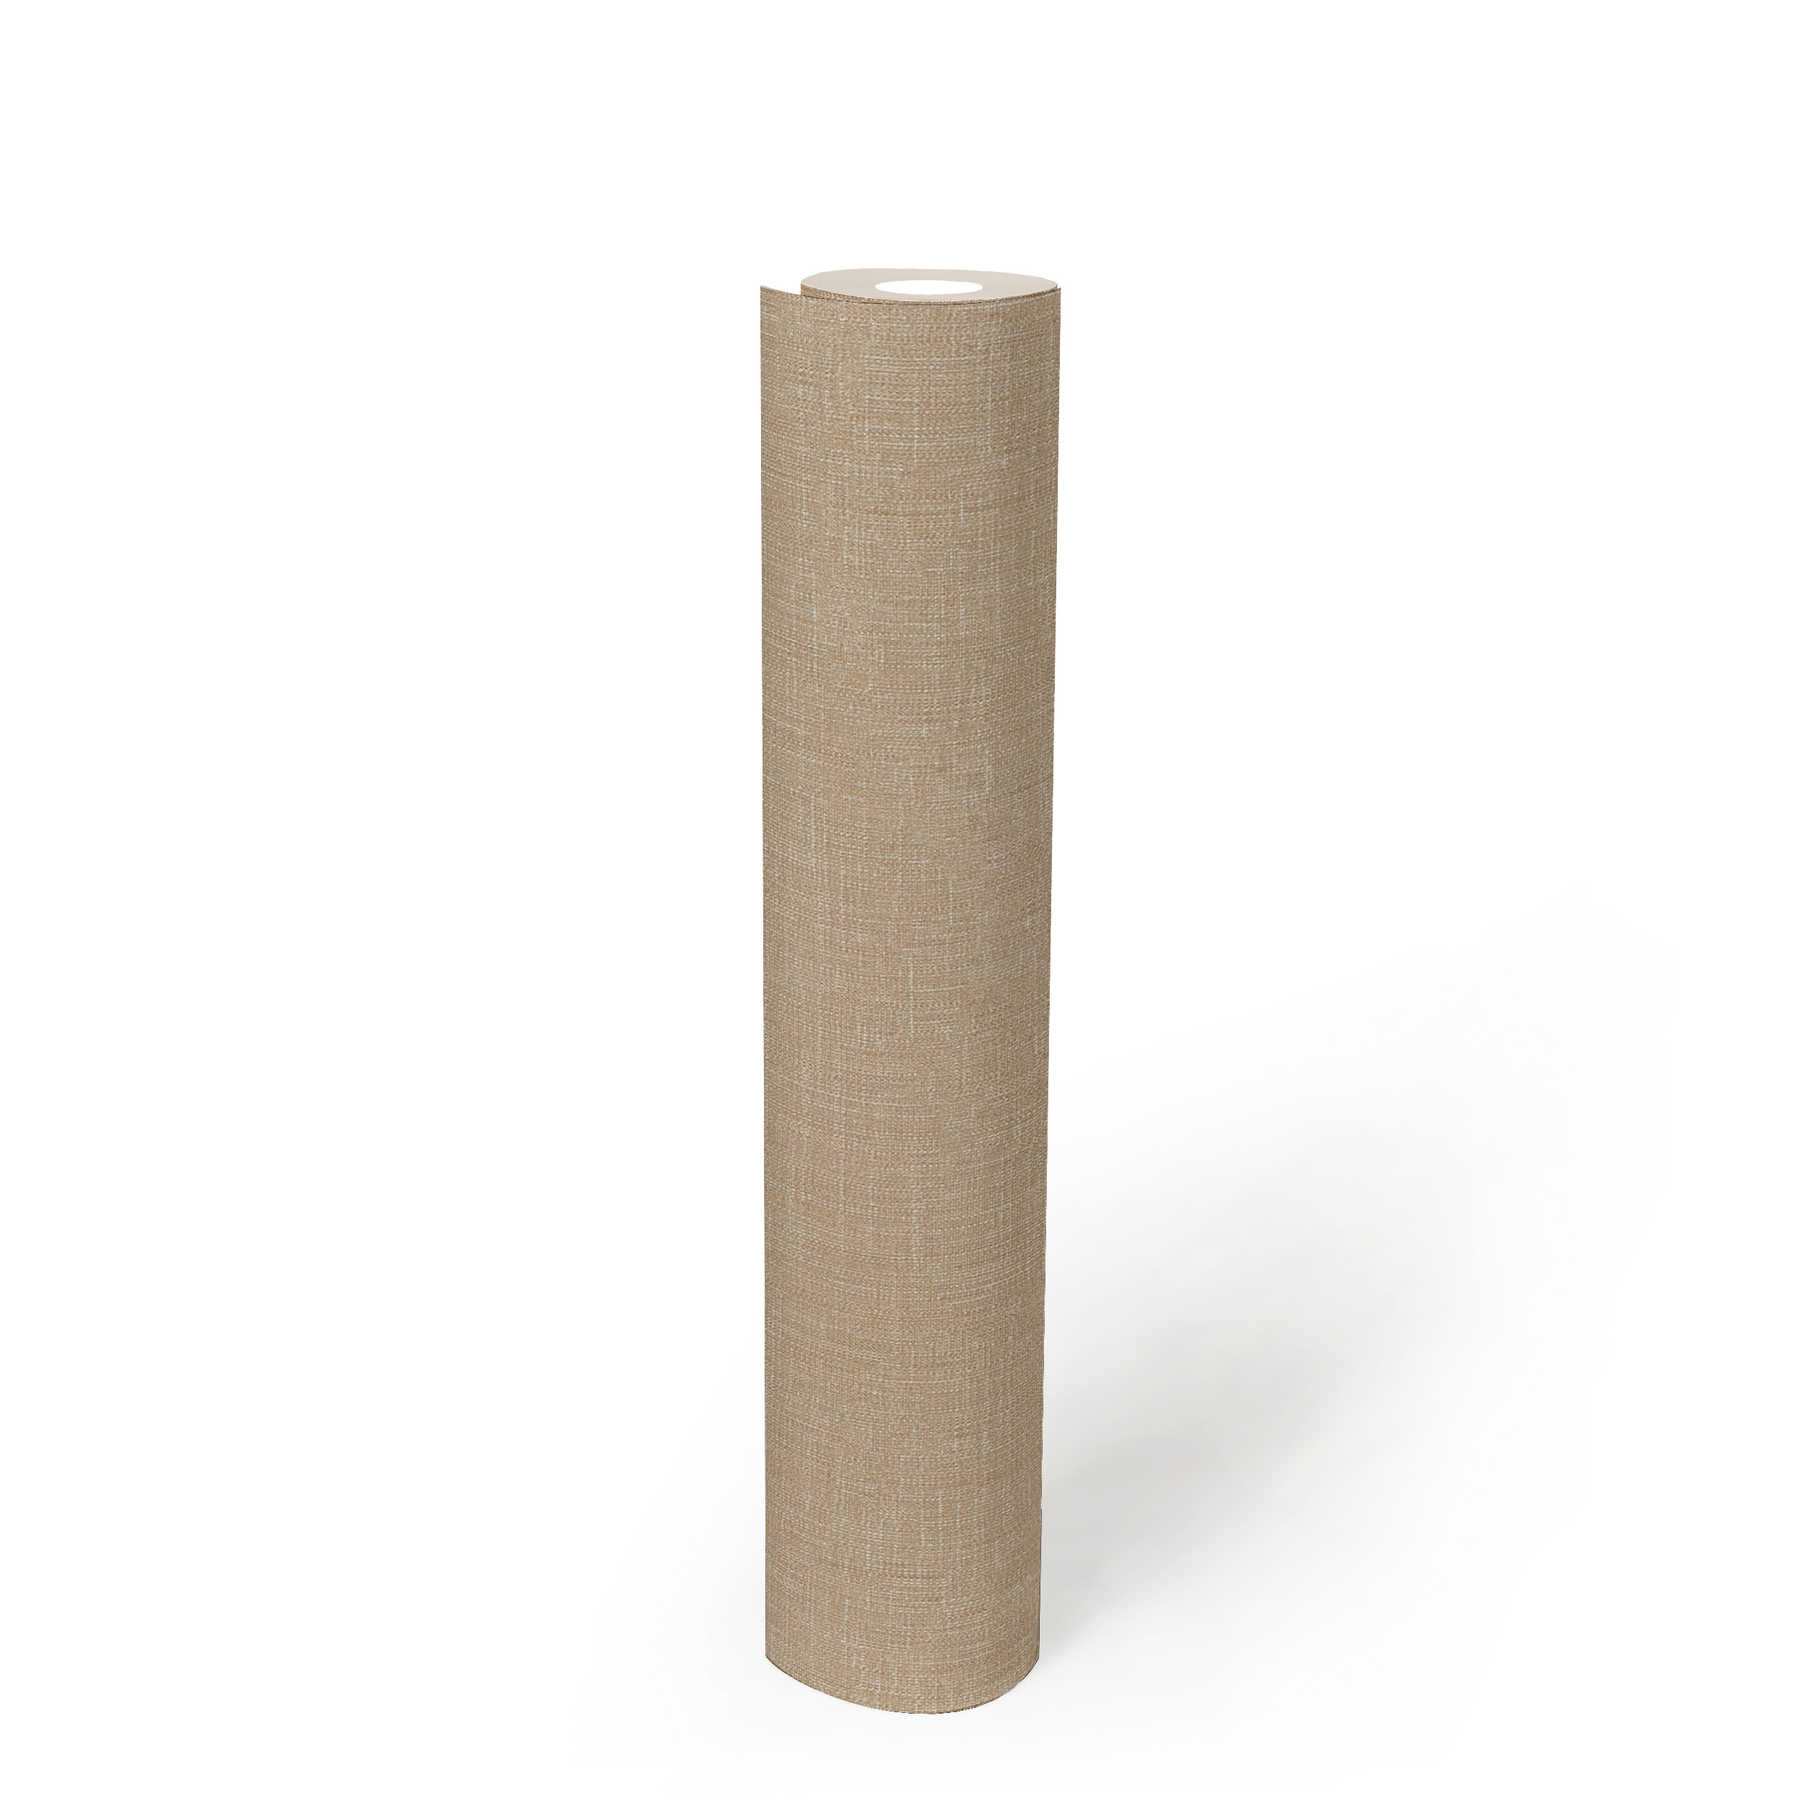             Wallpaper with textile structure - brown
        